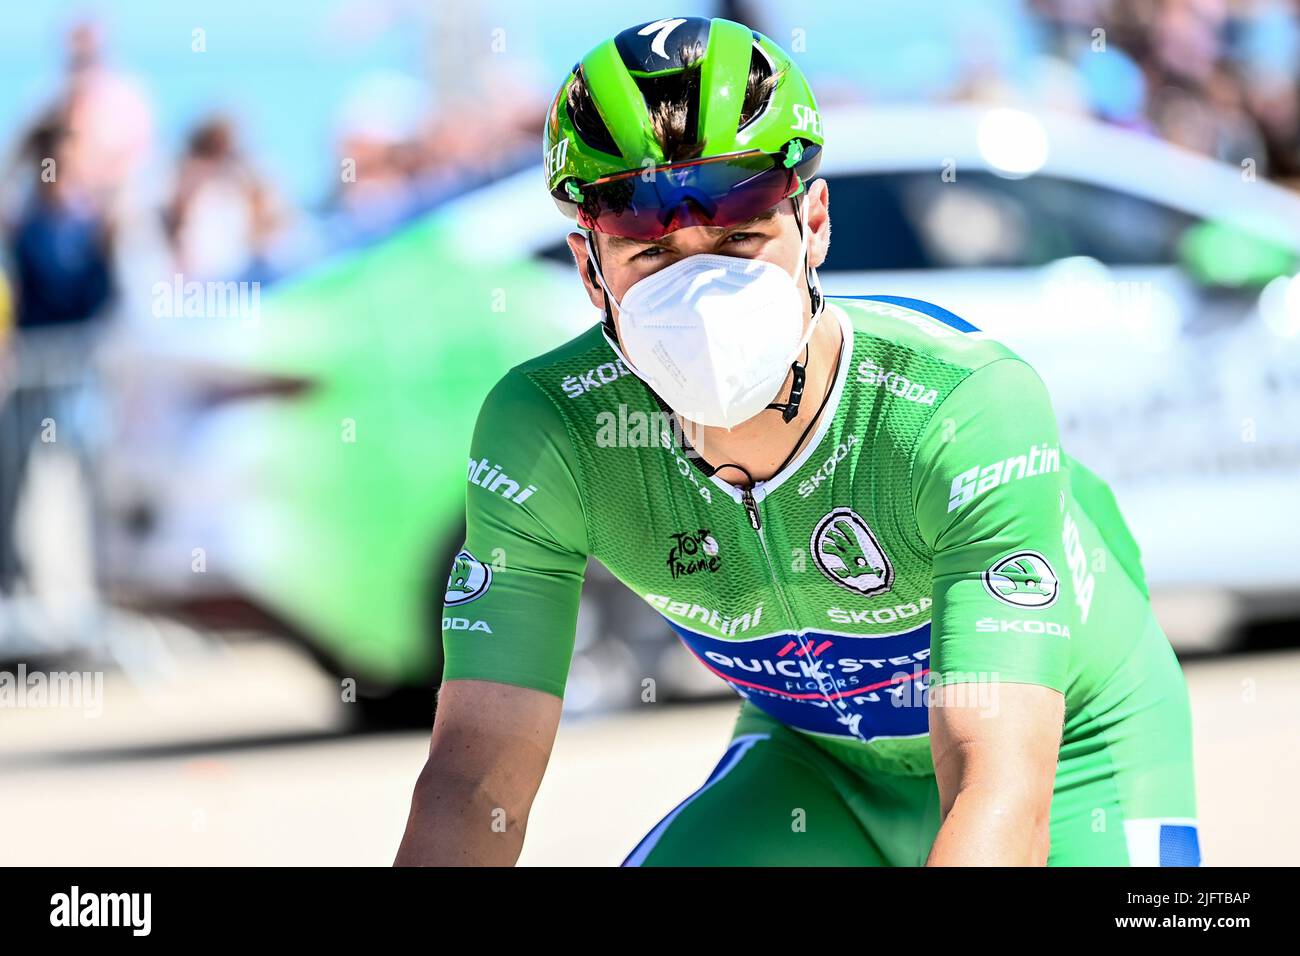 Dunkerque, France. 05th July, 2022. Dutch Fabio Jakobsen of Quick-Step Alpha Vinyl pictured at the start of stage four of the Tour de France cycling race, a 171.5 km race from Dunkerque to Calais, France on Tuesday 05 July 2022. This year's Tour de France takes place from 01 to 24 July 2022. BELGA PHOTO JASPER JACOBS - UK OUT Credit: Belga News Agency/Alamy Live News Stock Photo